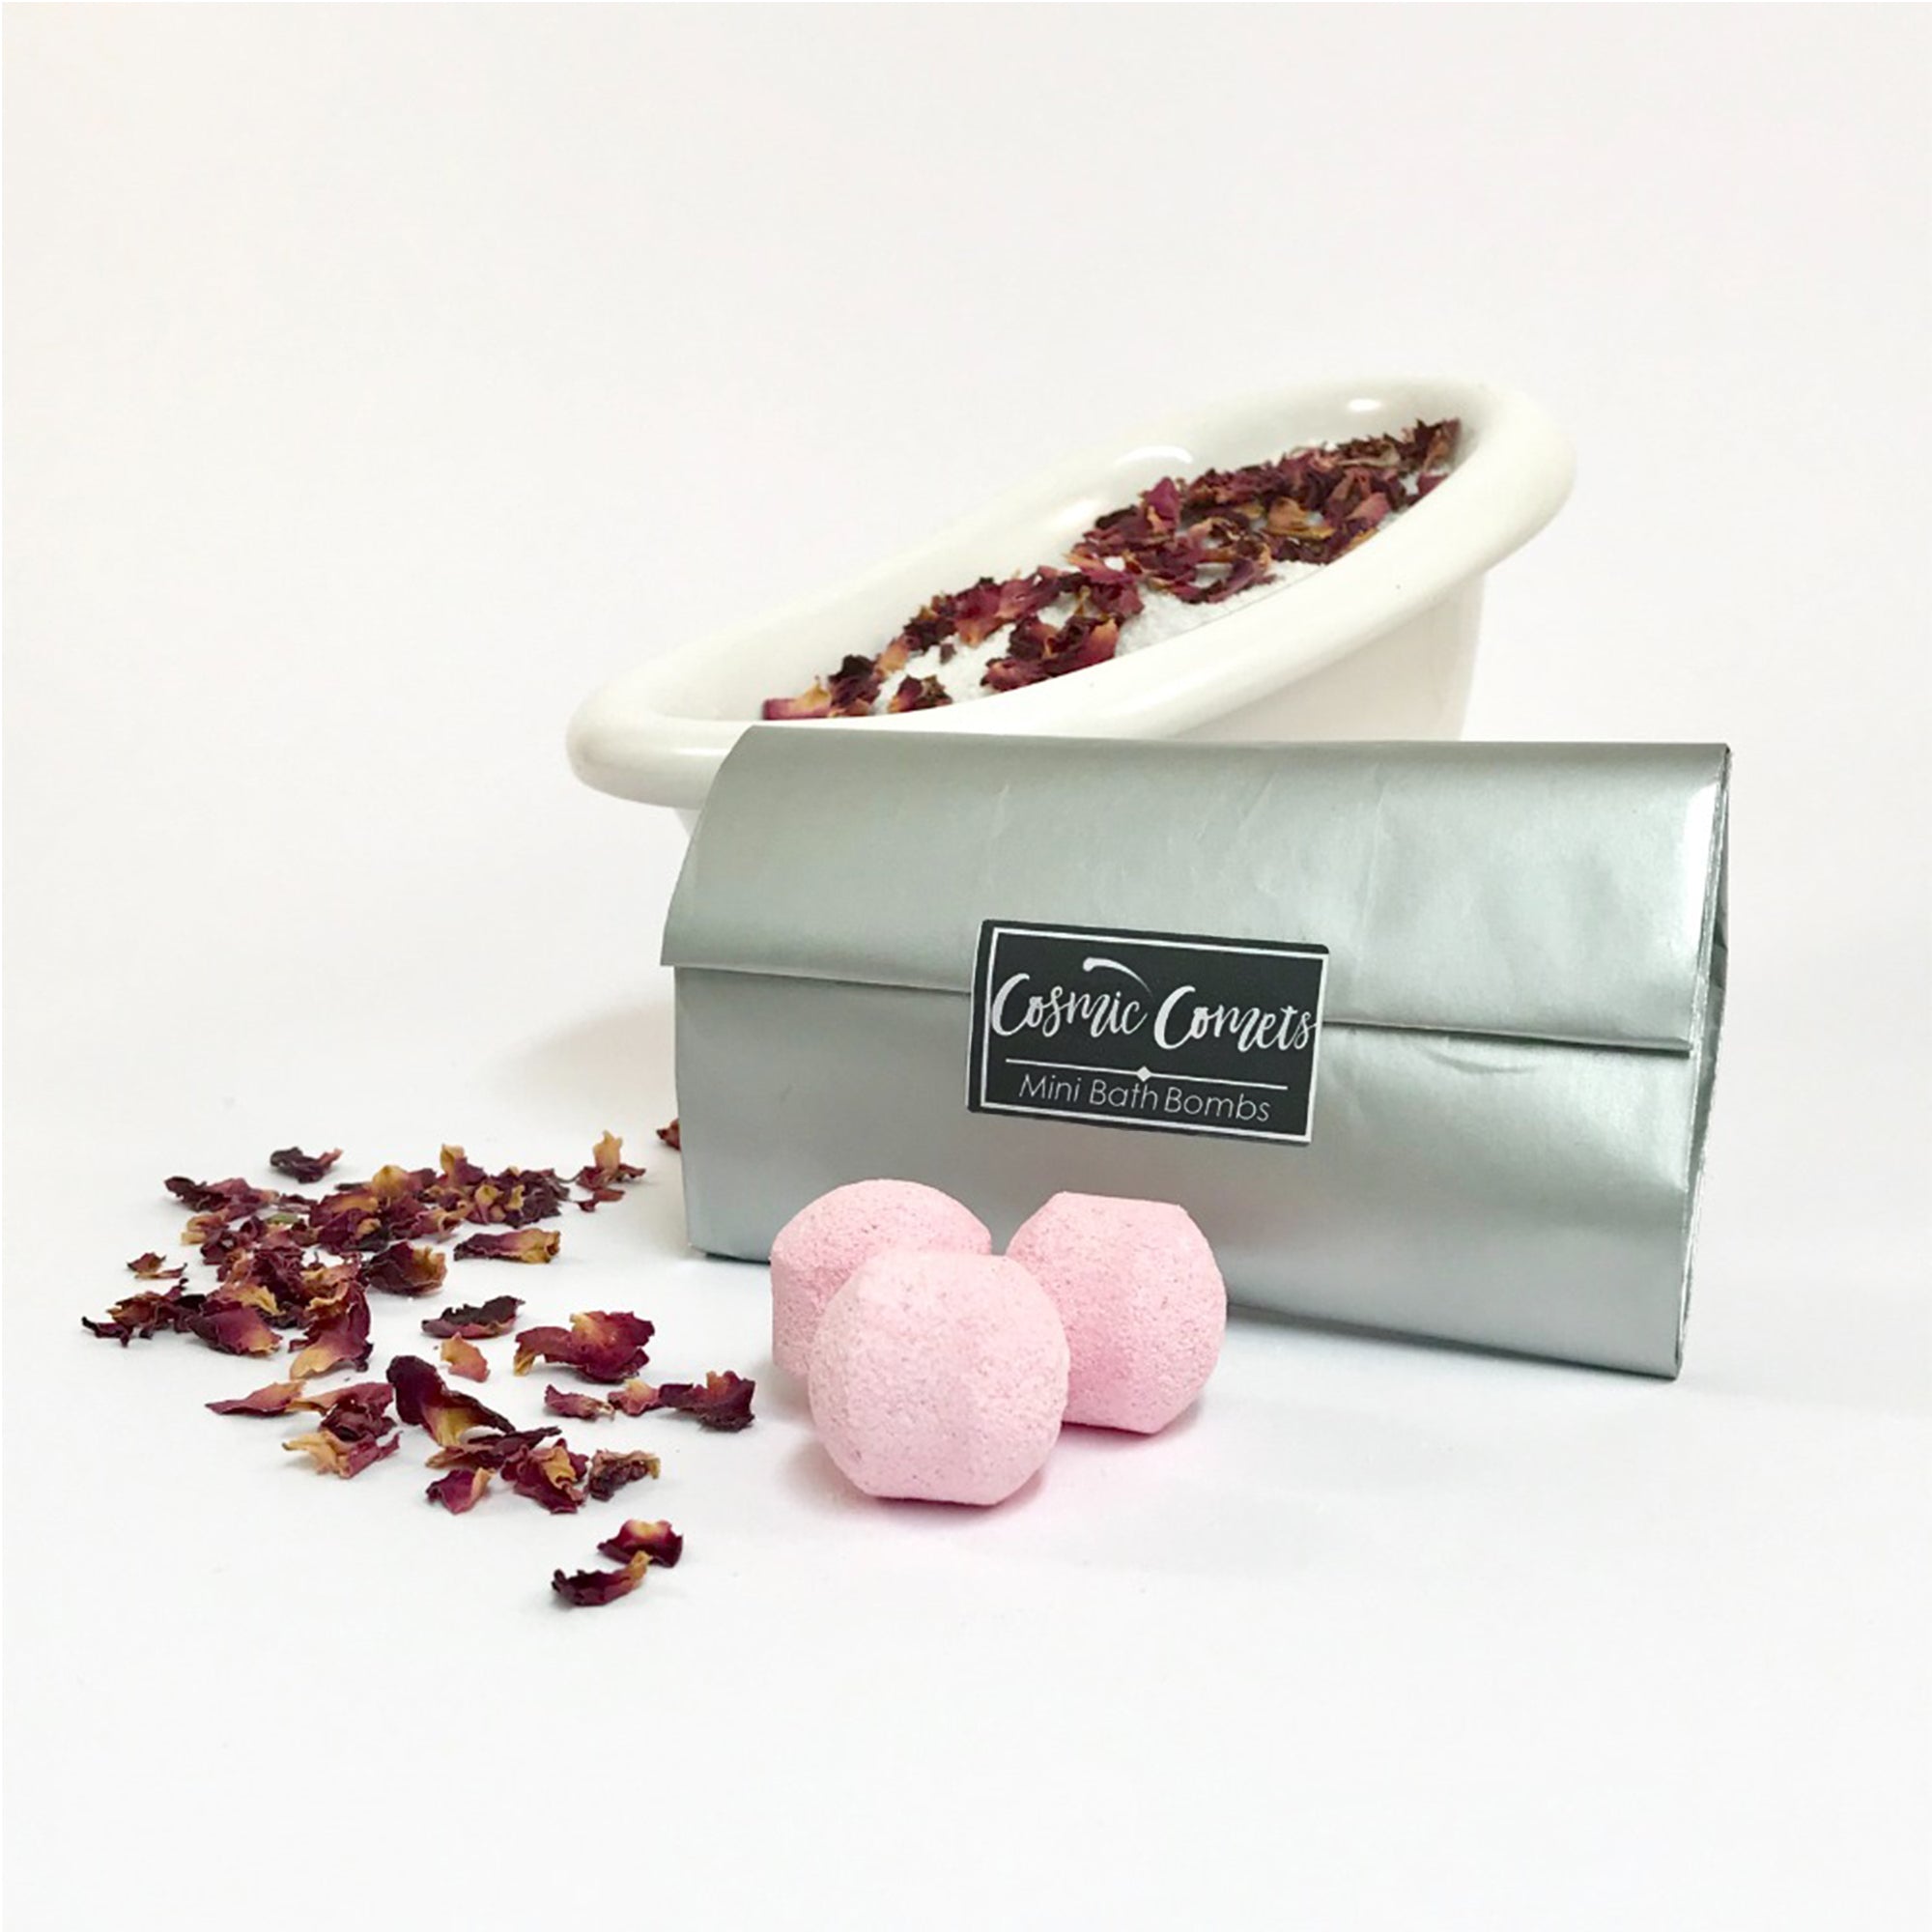 Spa Luxury Bath Bomb Pamper Gift Set for a Super Woman! Care Package Gifts Stress Relief Relaxation Gift Set Seven and Six Cosmetics 